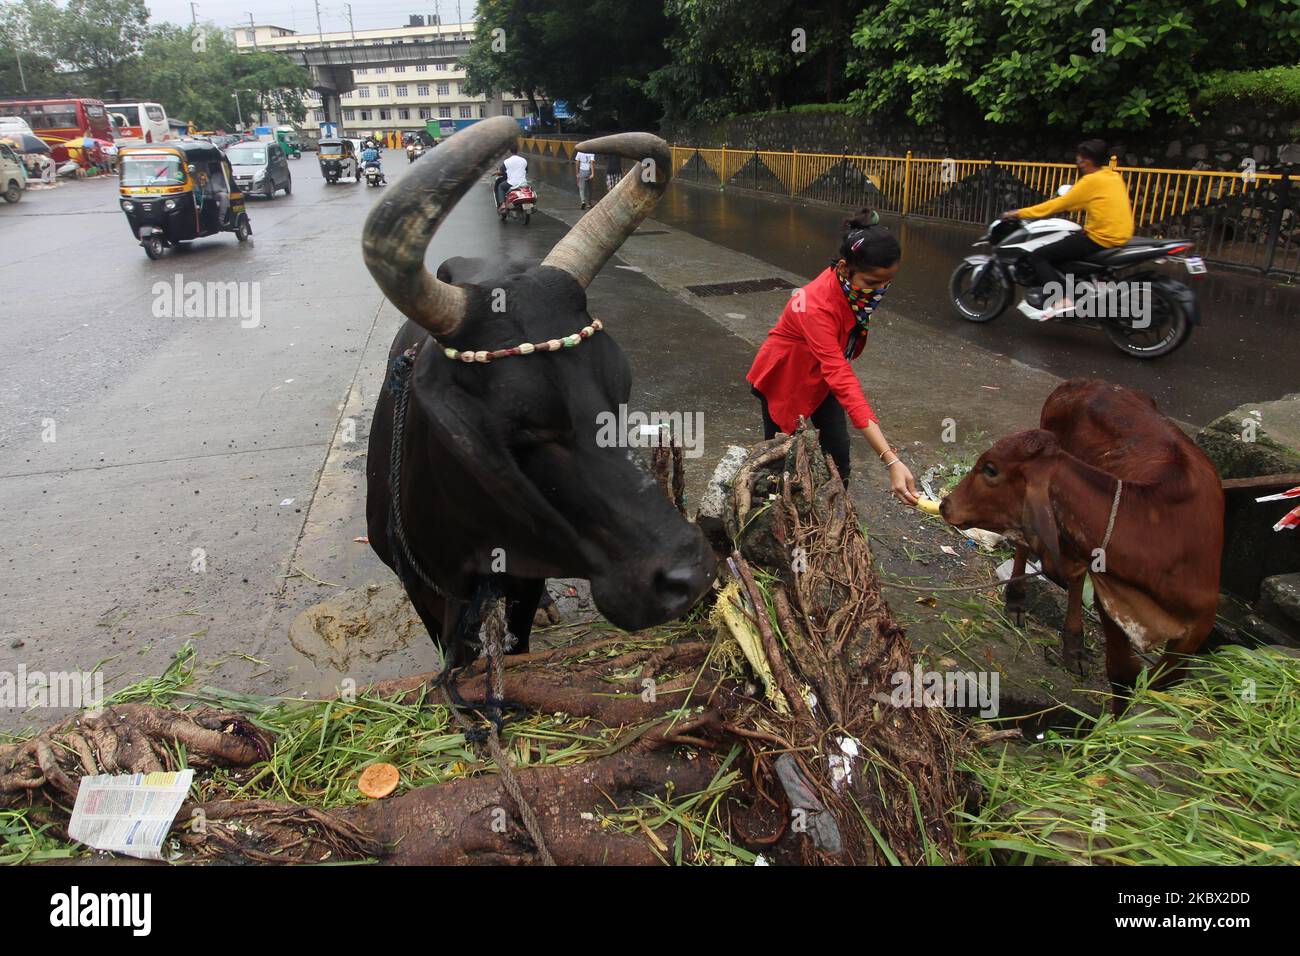 A devotee feeds a calf outside a temple during Hindu festival of Janmashtami in Mumbai, India on August 12, 2020. Janmashtami is celebrated as the birthday of lord Krishna, the god of love and compassion. (Photo by Himanshu Bhatt/NurPhoto) Stock Photo